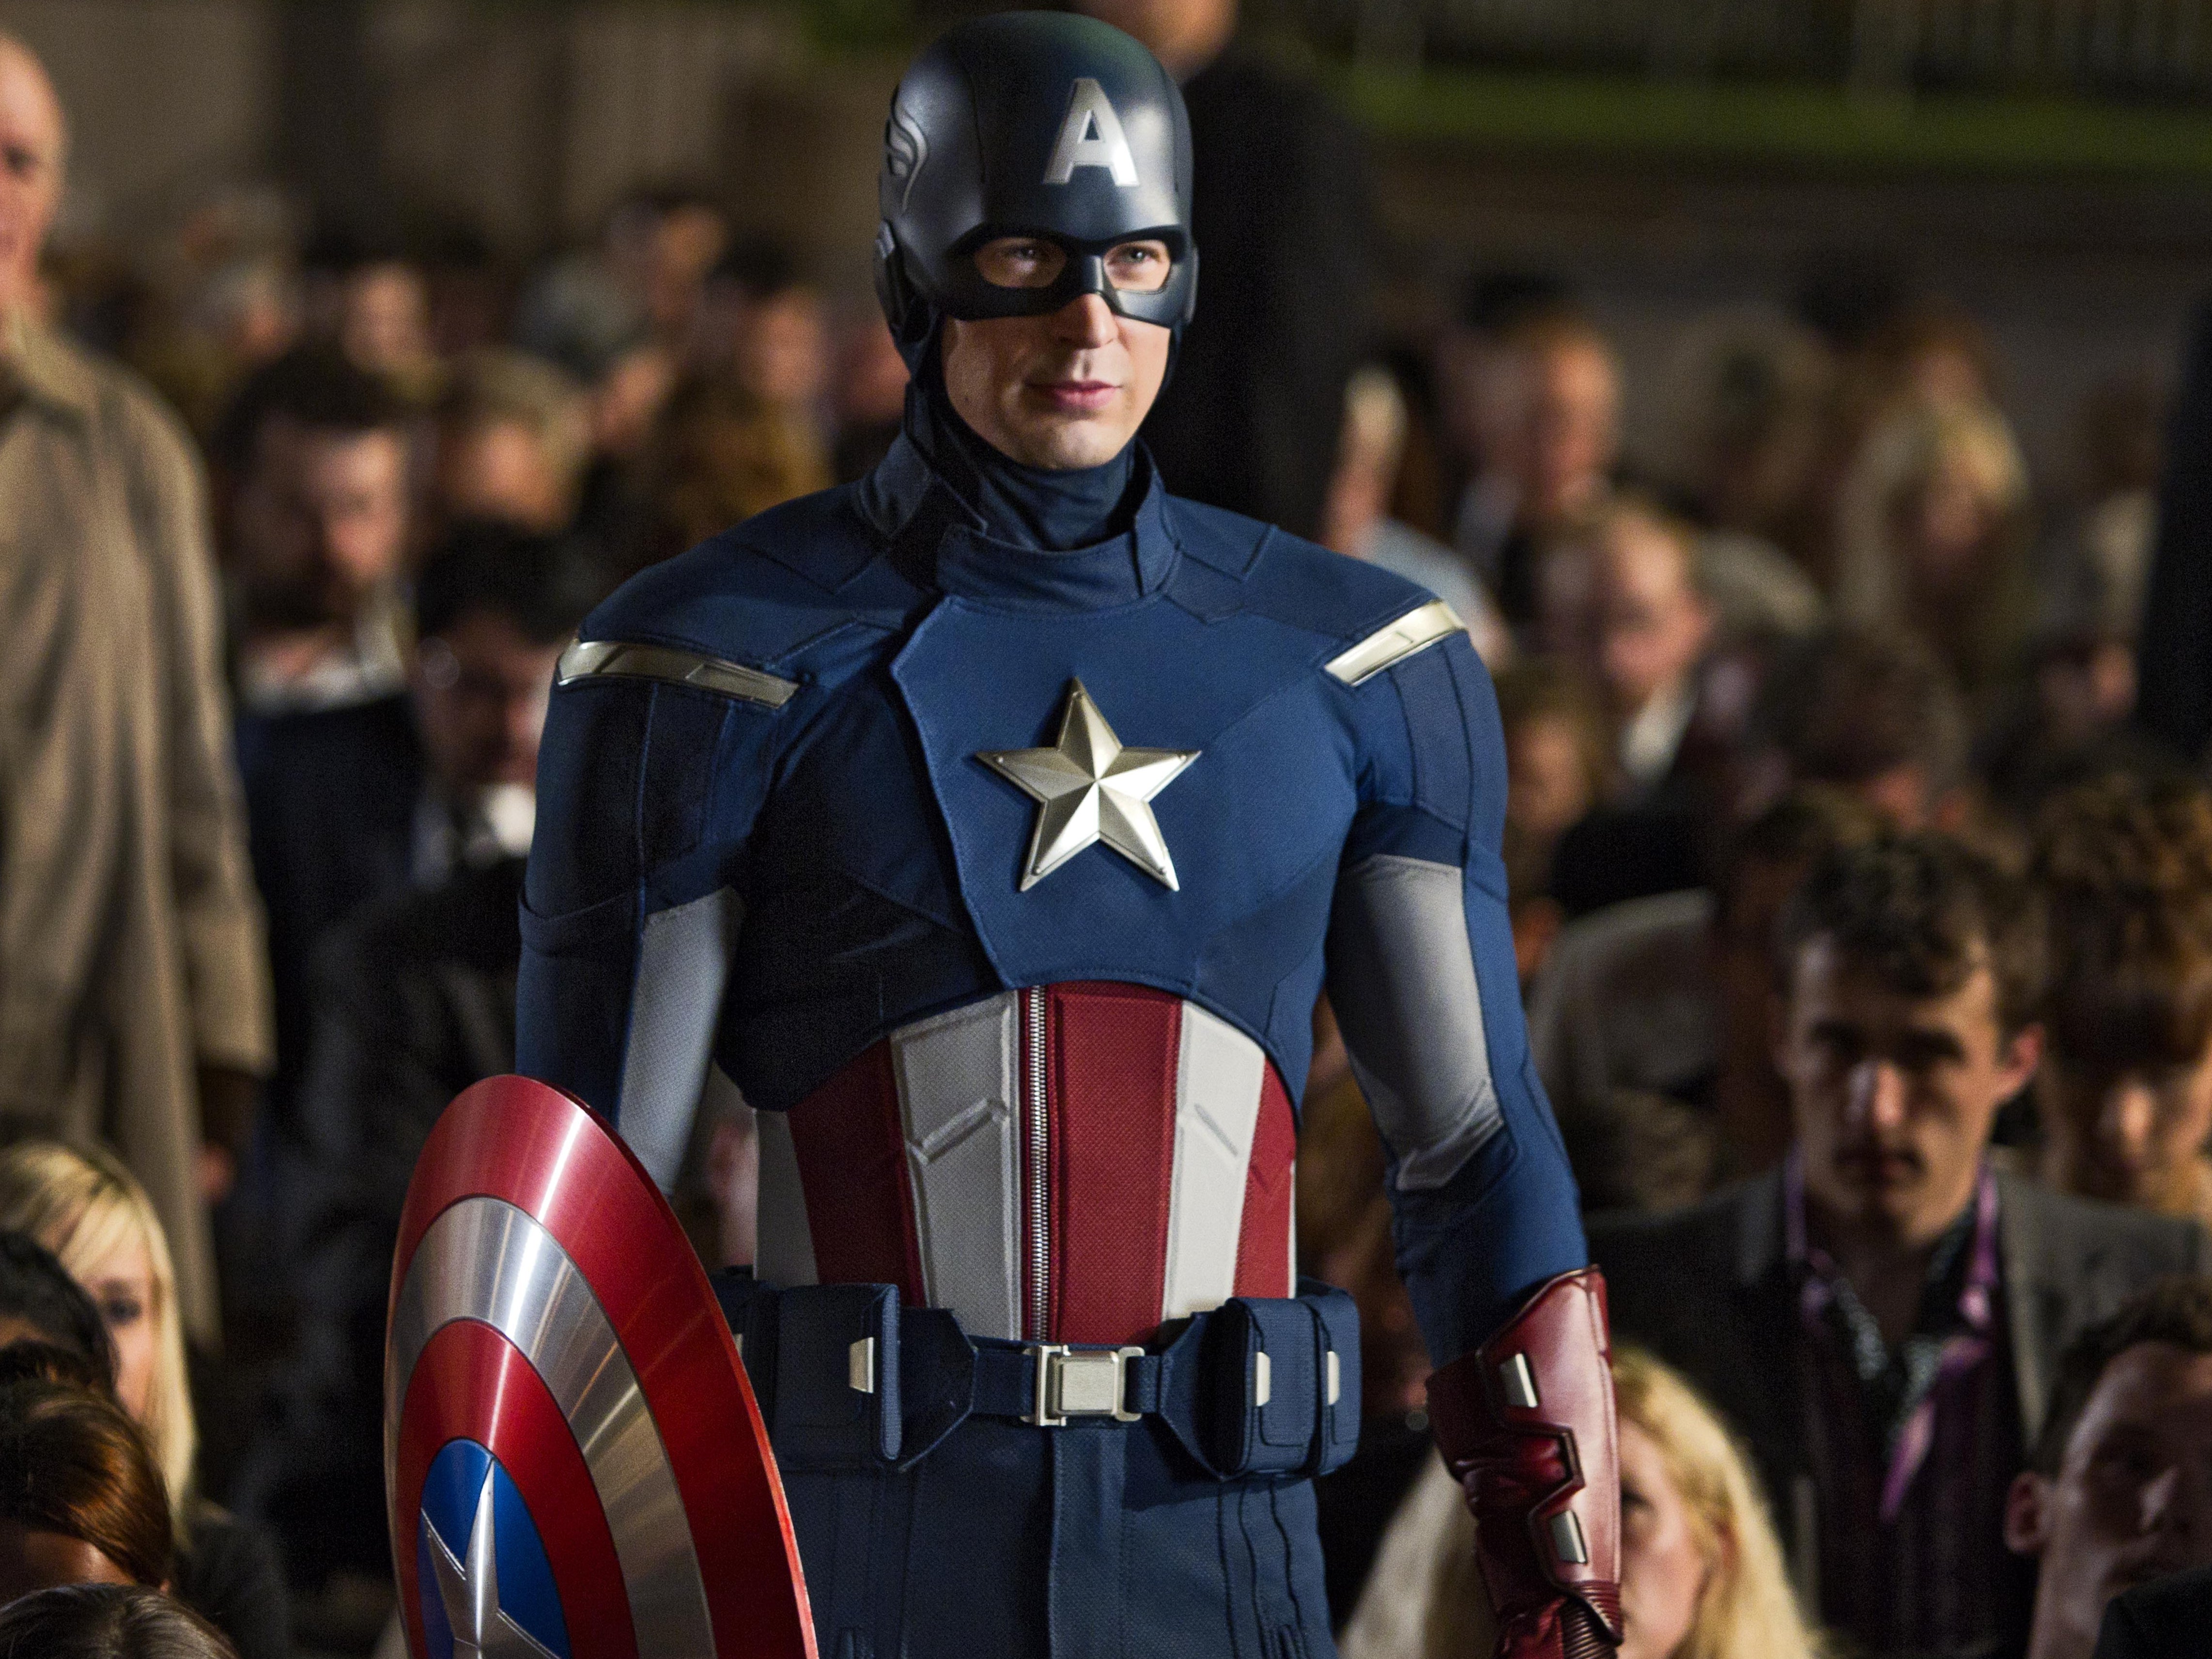 Captain America co-creator's son condemns pro-Trump Capitol Hill rioters using Marvel character's imagery